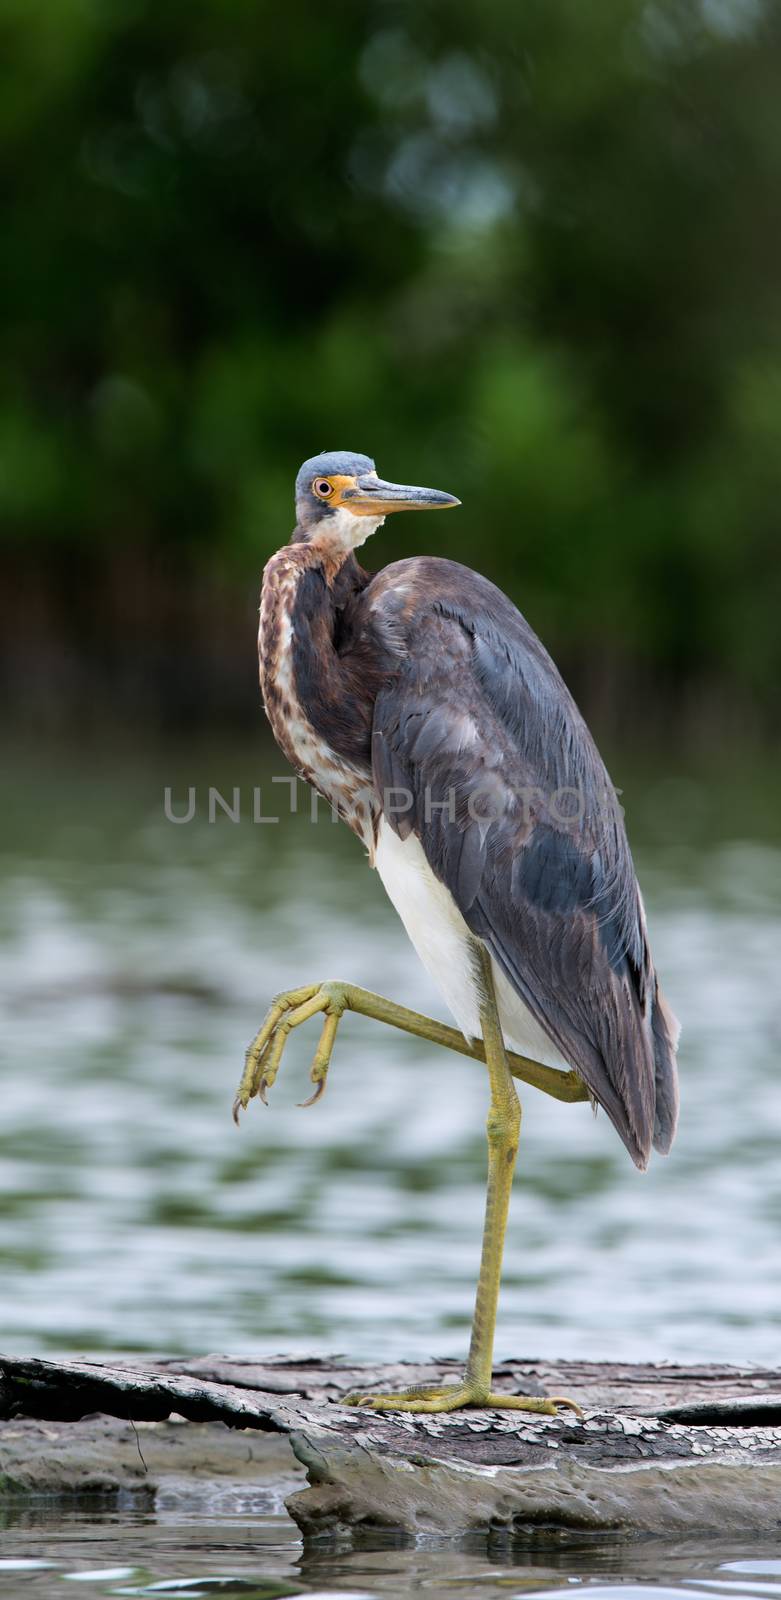 Tricolored heron (Egretta tricolor) wading in shallow water .  by SURZ